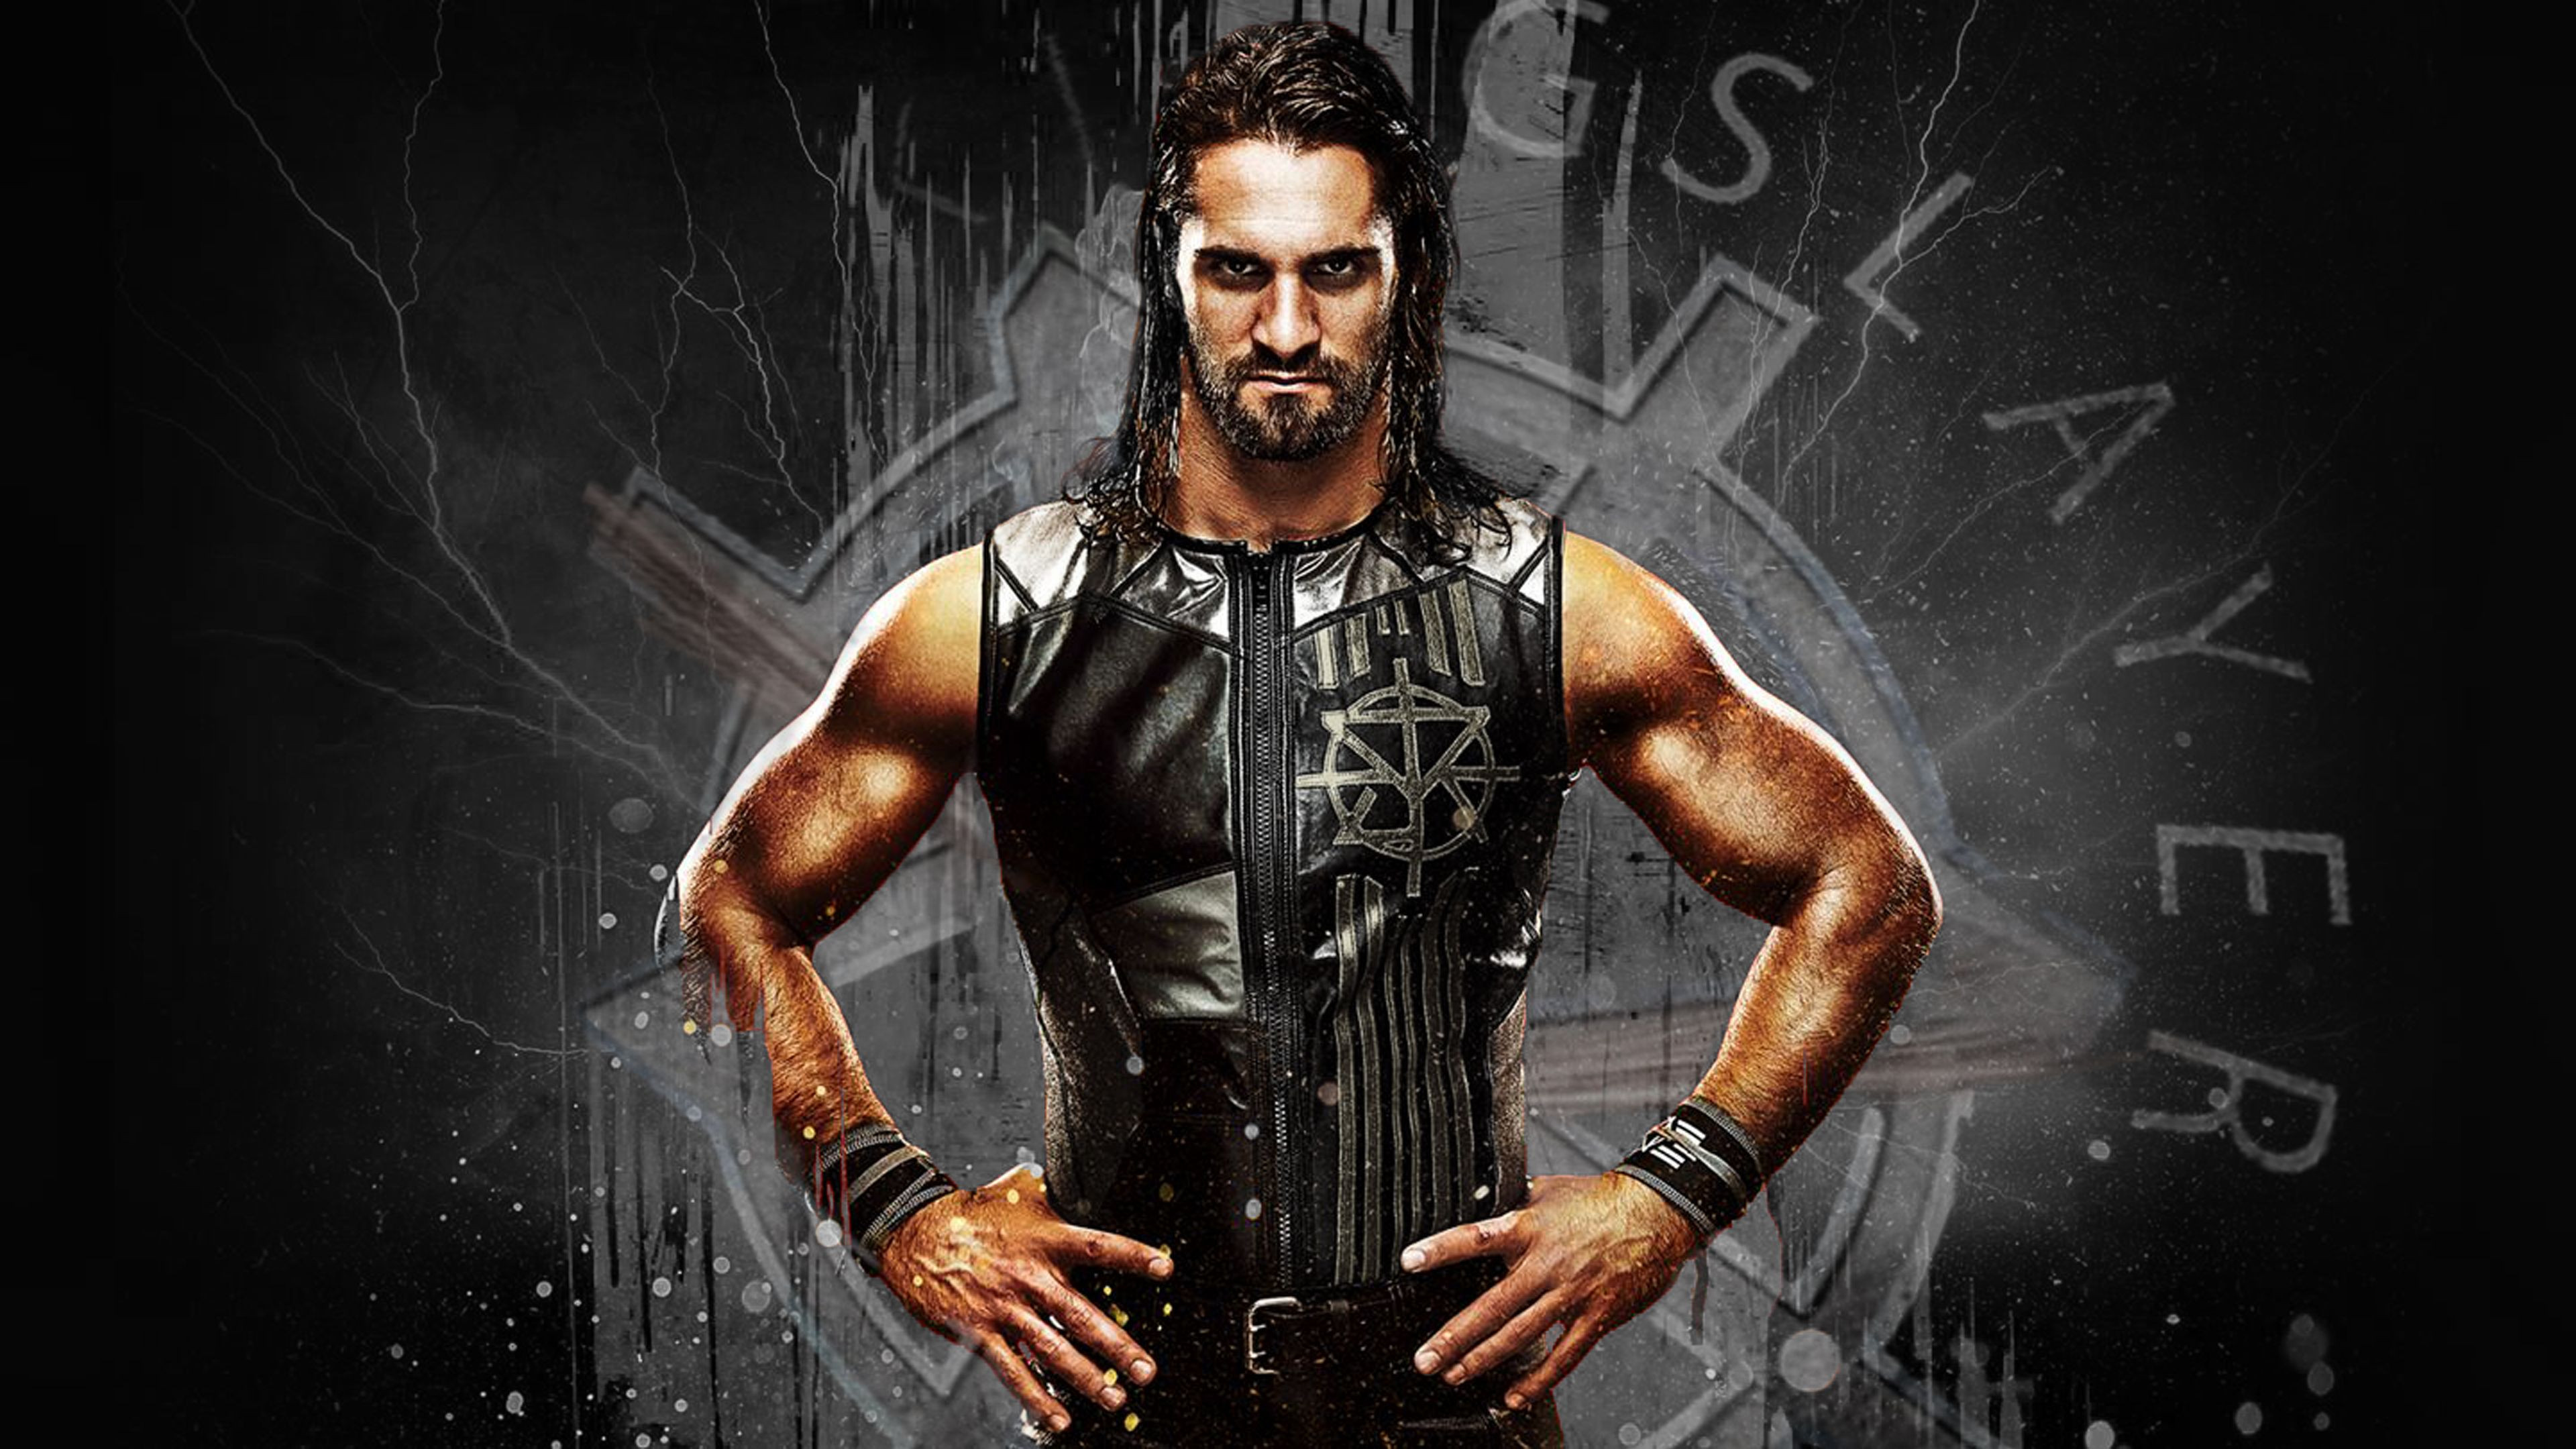 3840x2160 Seth Rollins Wallpaper 2018 Best Of Seth Rollins 2018 Wallpapers Wallpaper  Cave